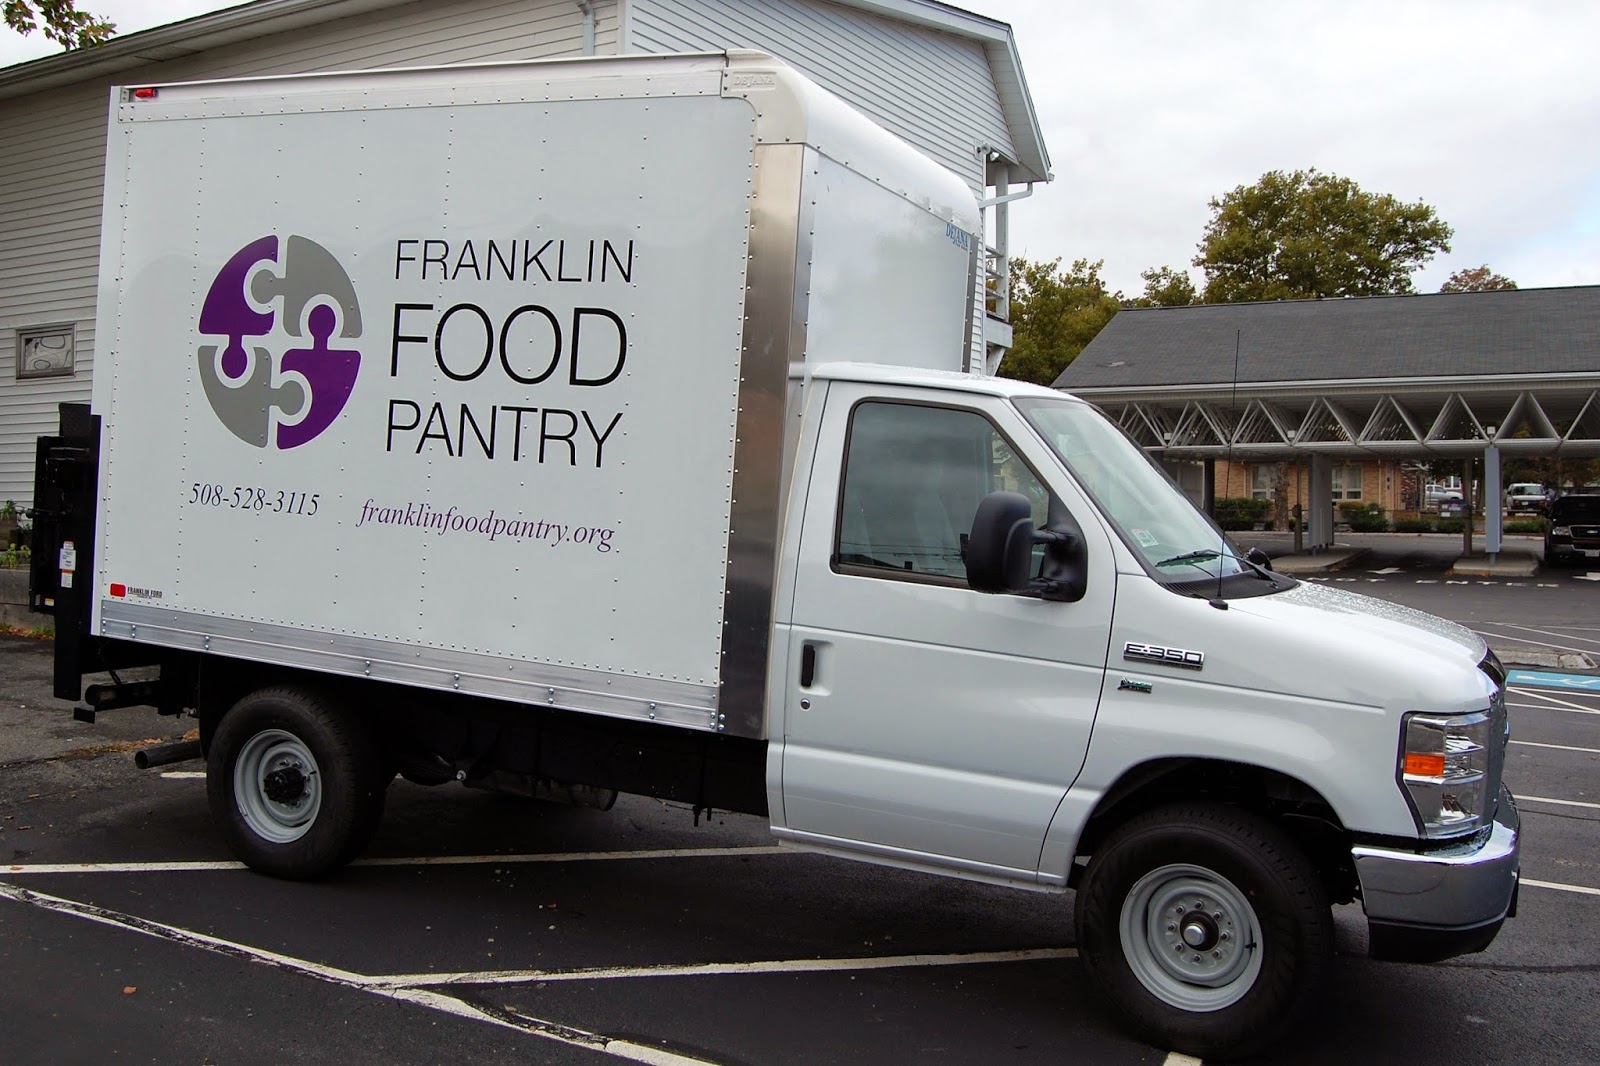 Franklin Food Pantry truck becomes the "mobile pantry"